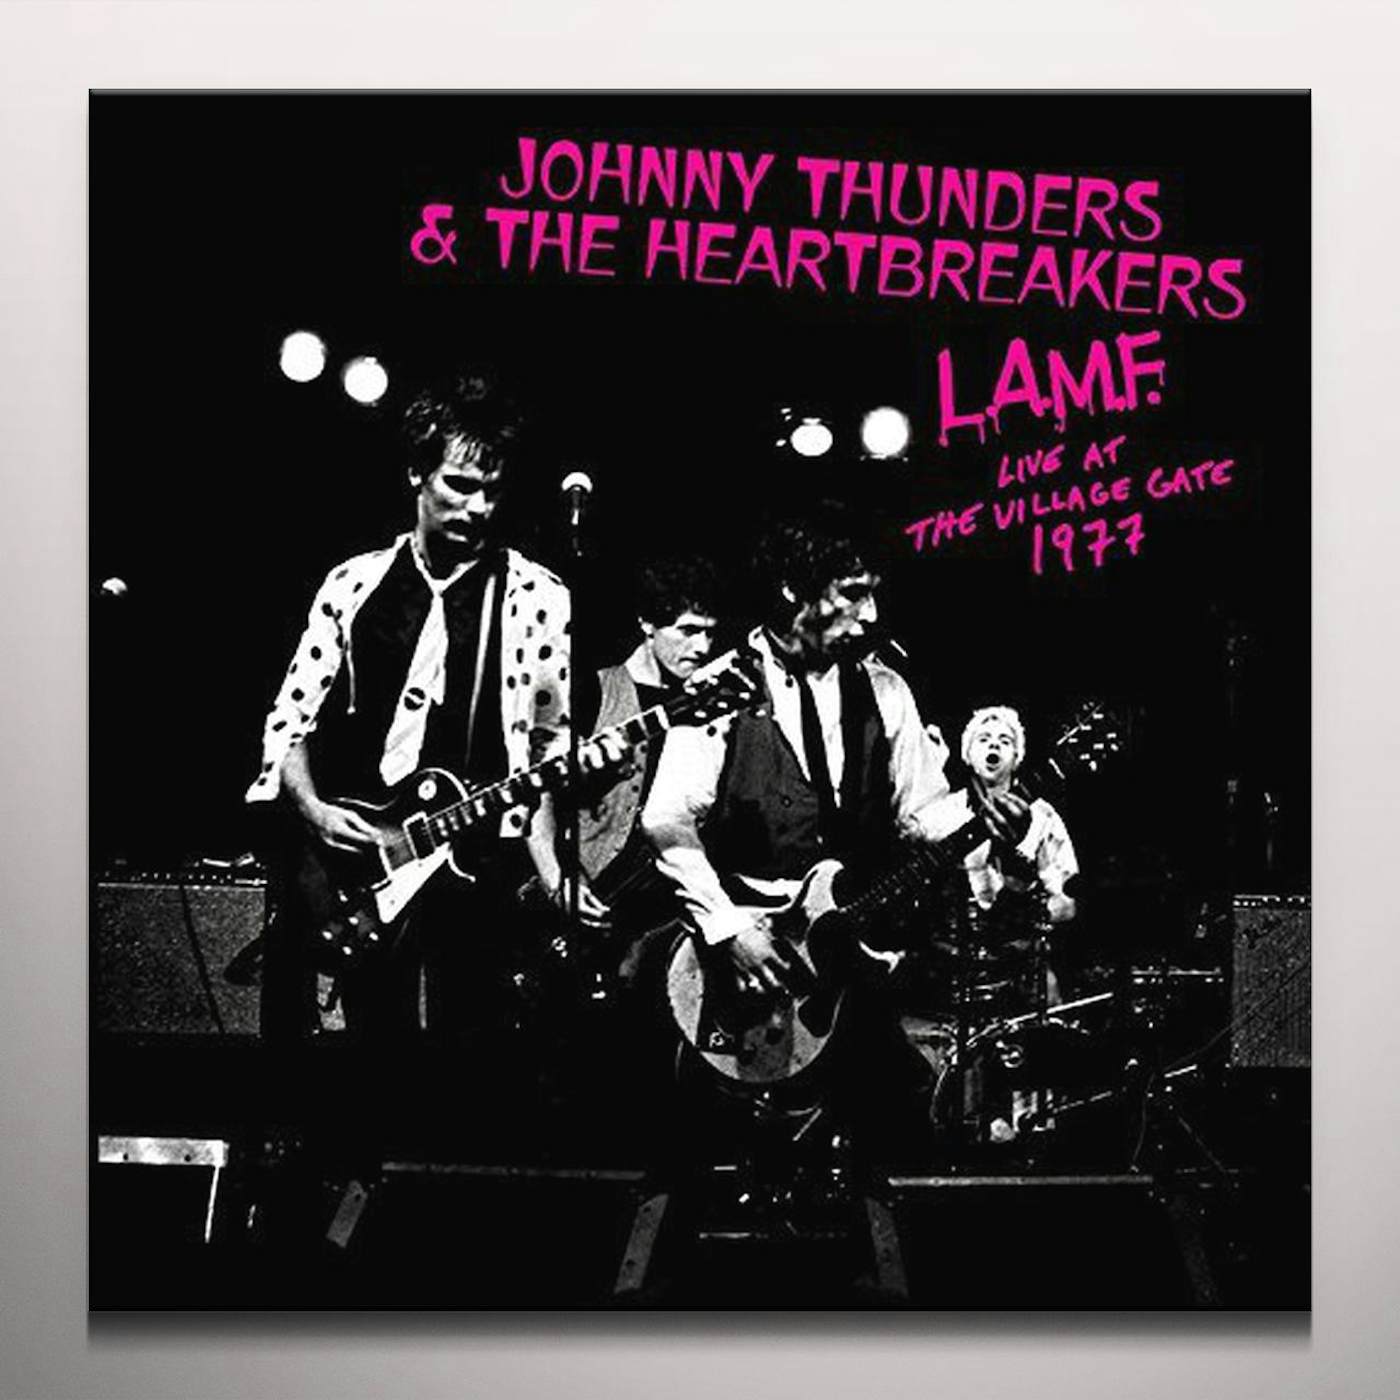 Johnny Thunders & The Heartbreakers L.A.M.F. - LIVE AT THE VILLAGE GATE 1977 Vinyl Record